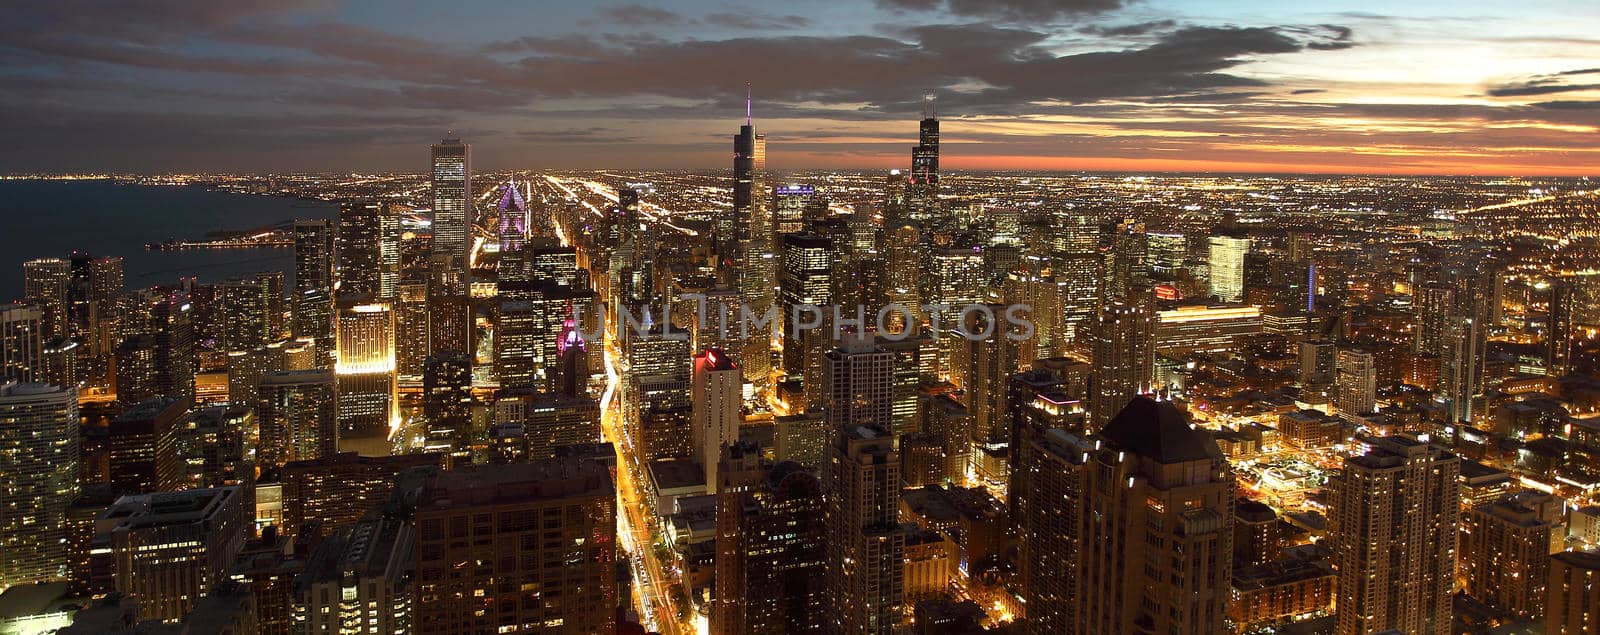 Atmospheric scene of Chicago at night showing Michigan Avenue and downtown by VivacityImages